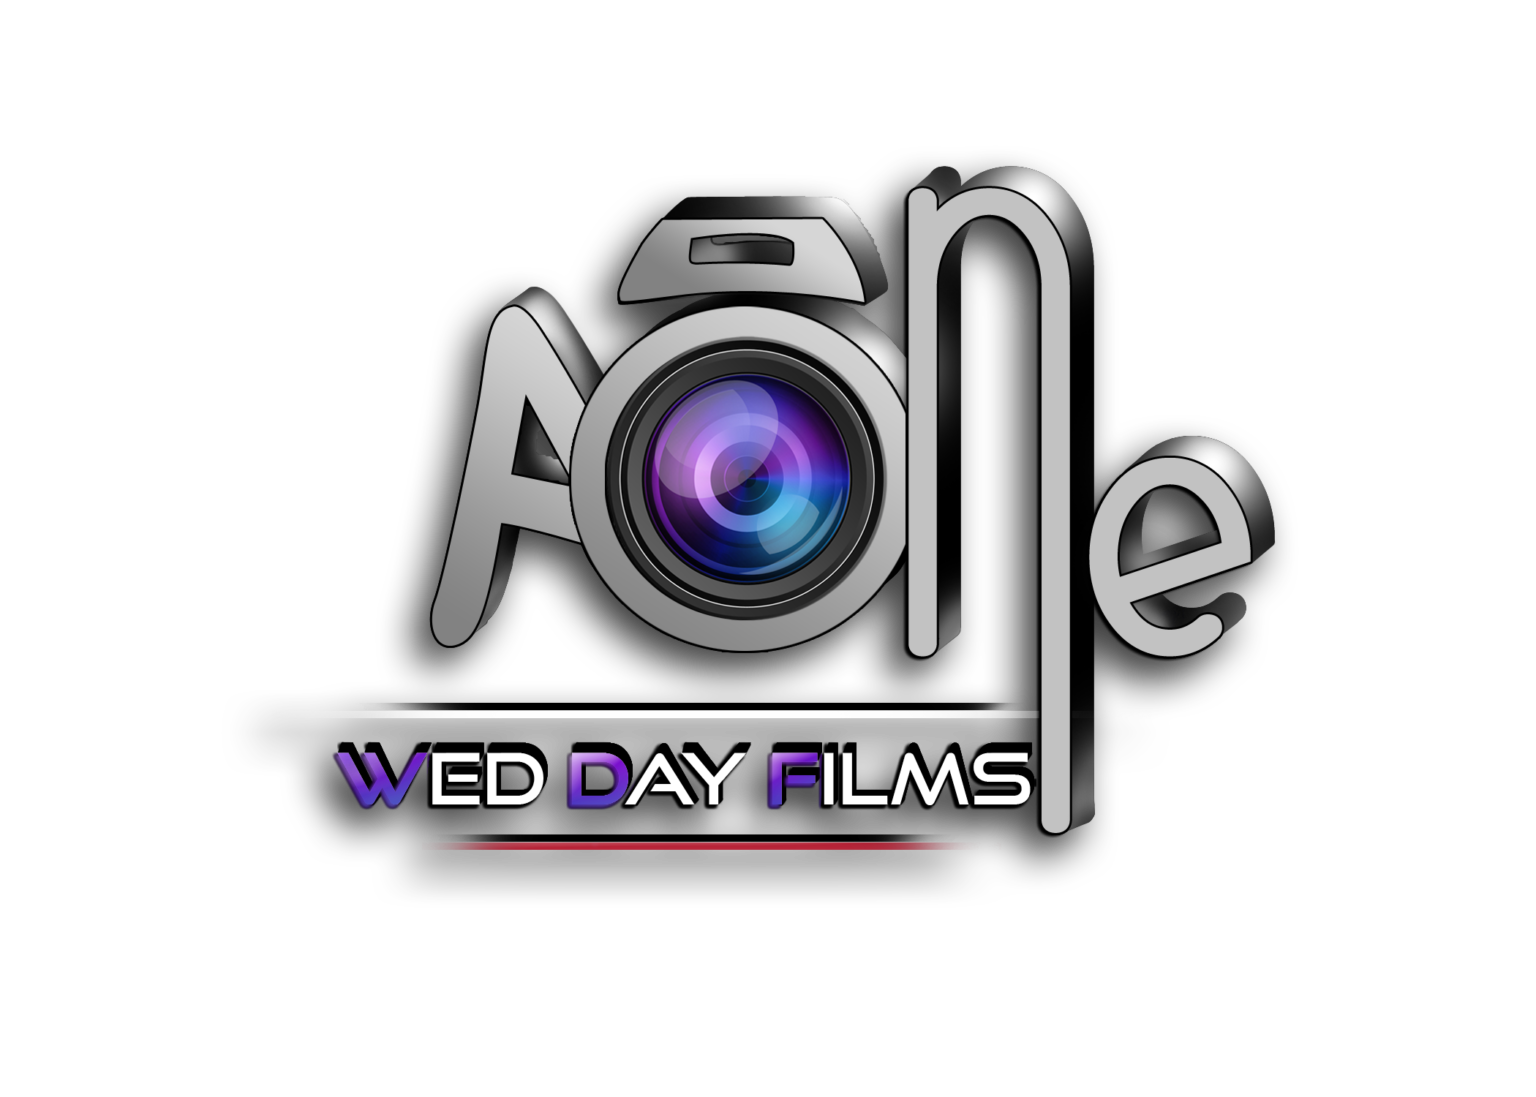 A-One Wed Day Films Logo